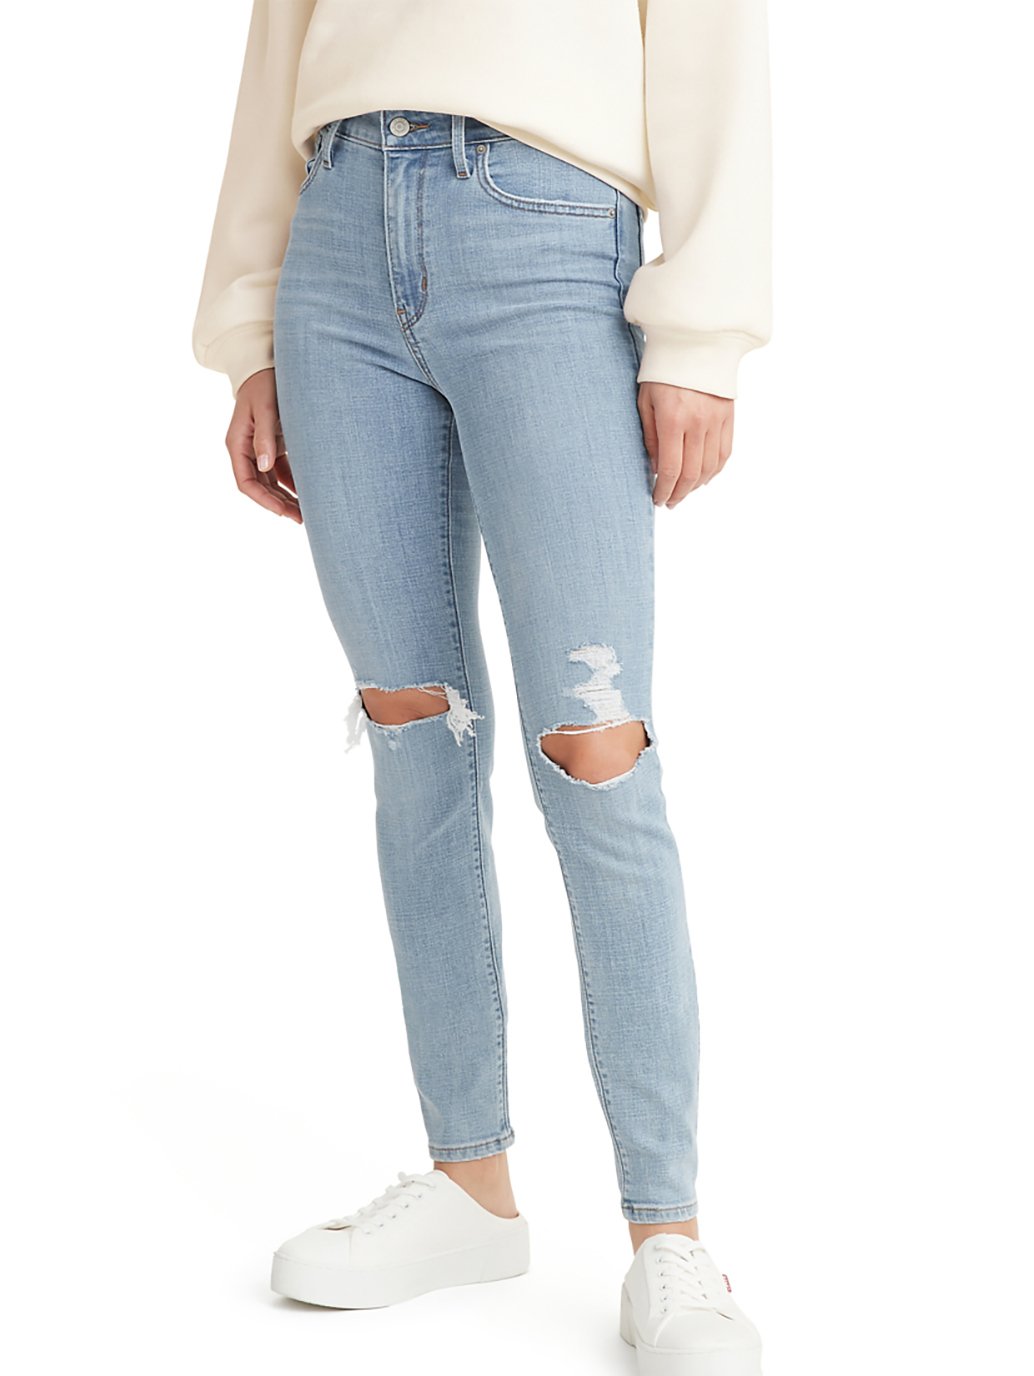 Buy Levi's® Women's 721 High-Waisted Skinny Jeans | Levi's® Official Online  Store SG